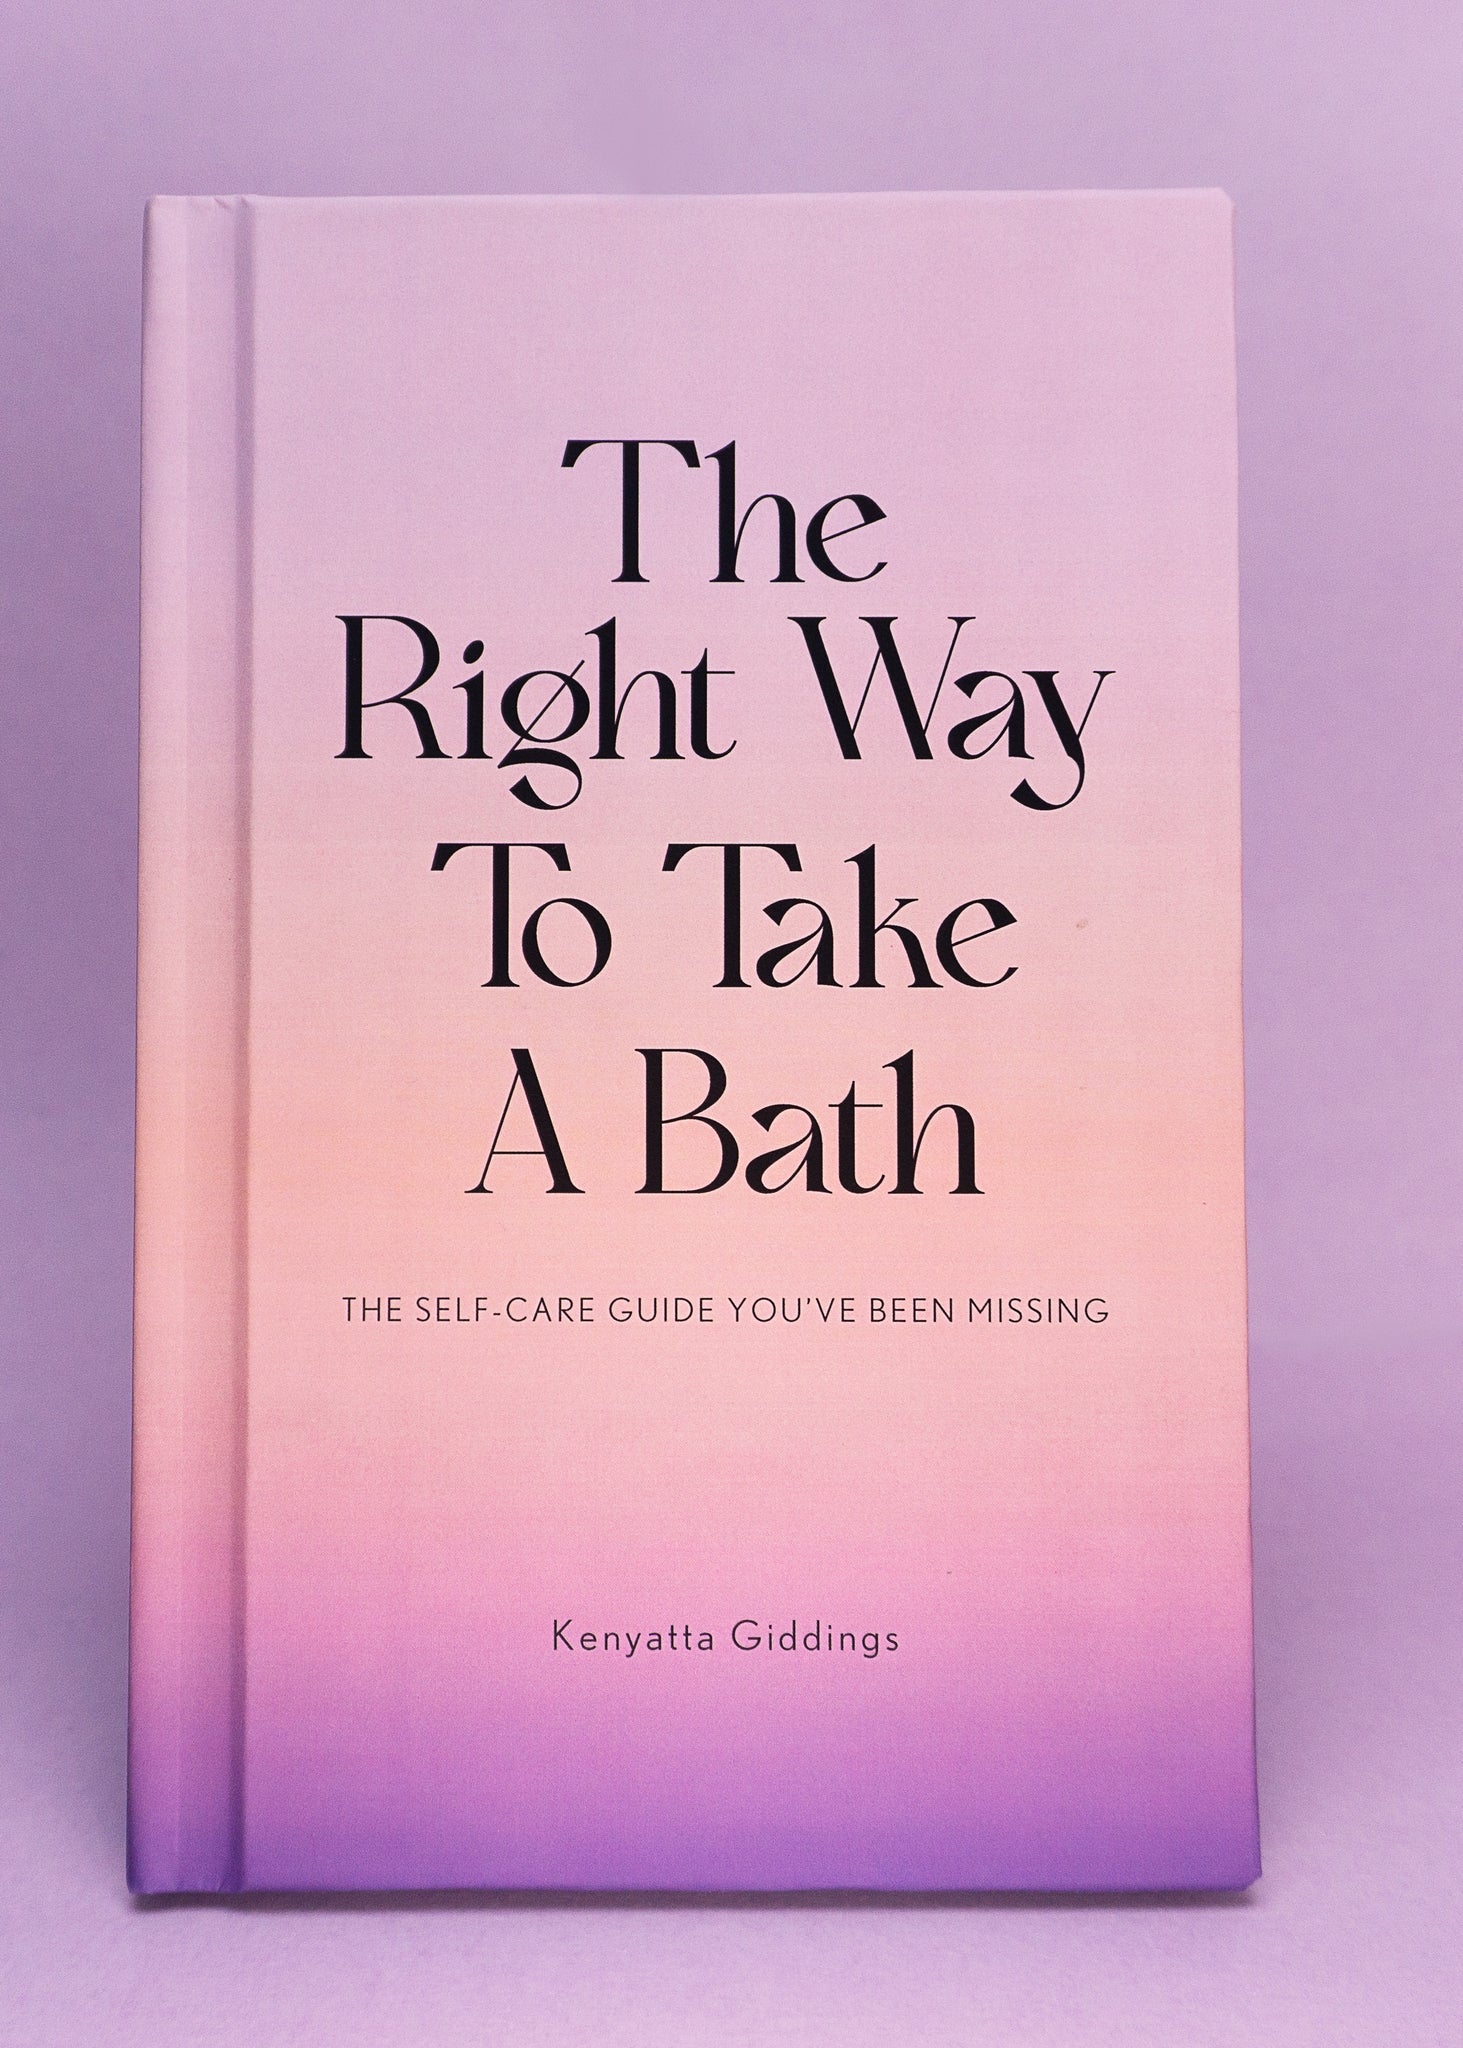 The Right Way To Take A Bath hardcover book with a soft touch matte pastel cover against a light purple background. The Right Way To Take A Bath is a self-care guide that captures bubble bath tips in a decor-friendly book that makes the perfect spa gift.